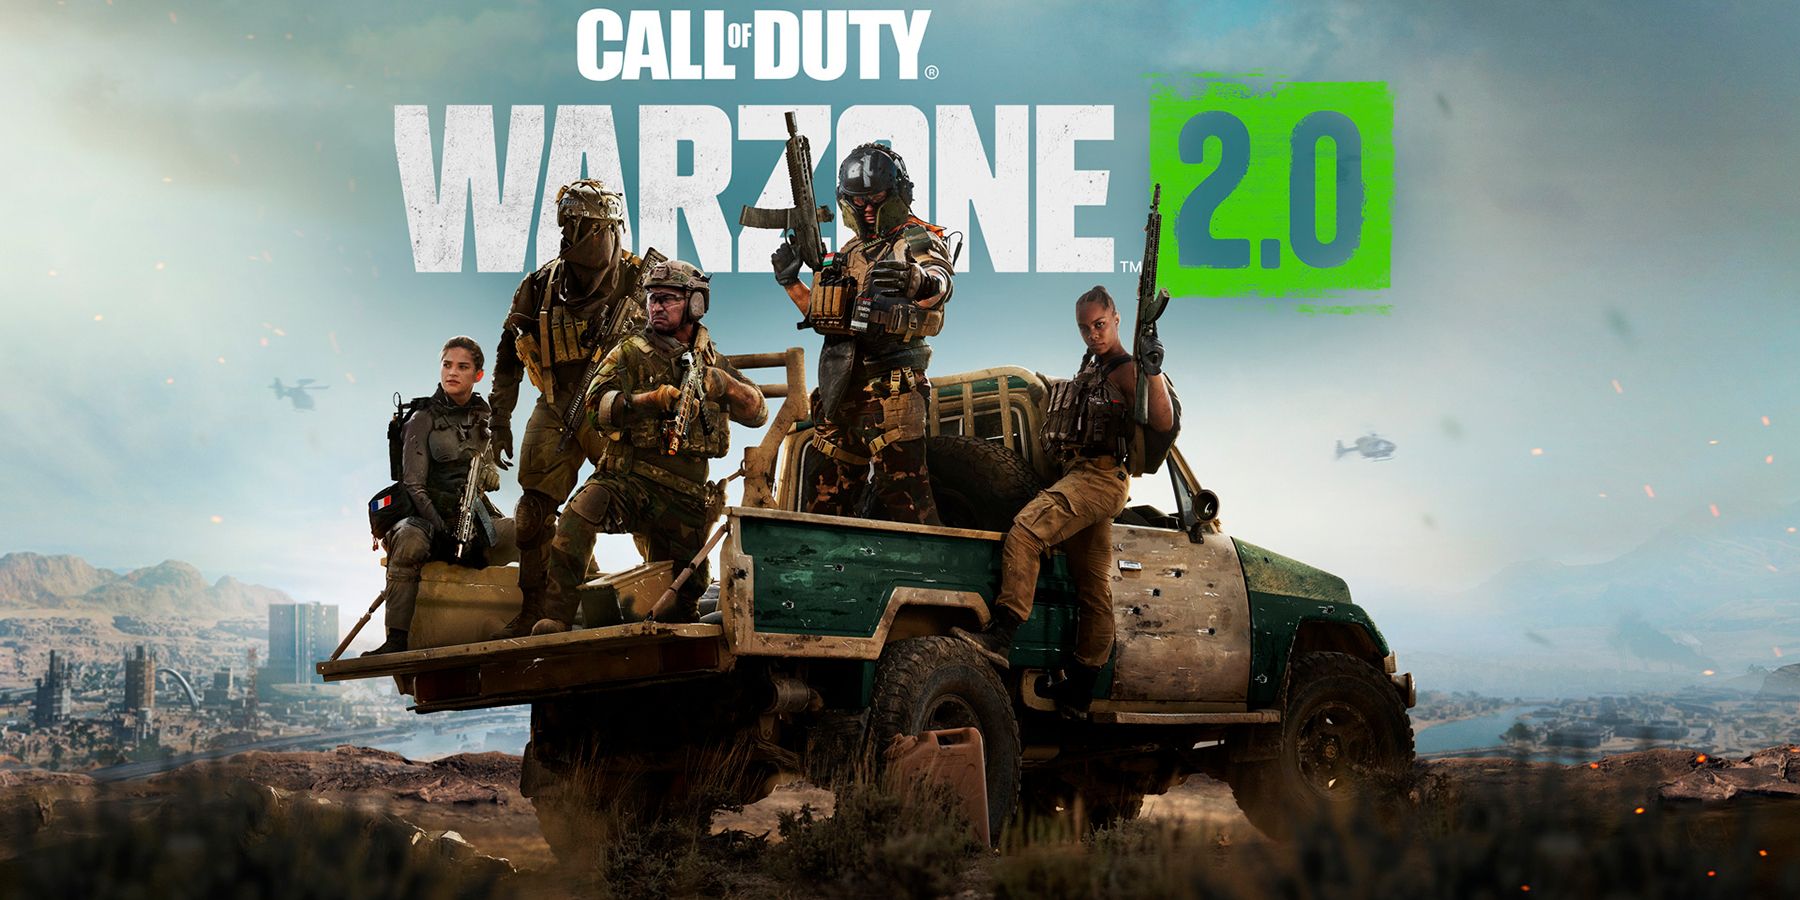 Plunder Warzone 2.0 release date, time and Call of Duty April 25 patch  notes, Gaming, Entertainment